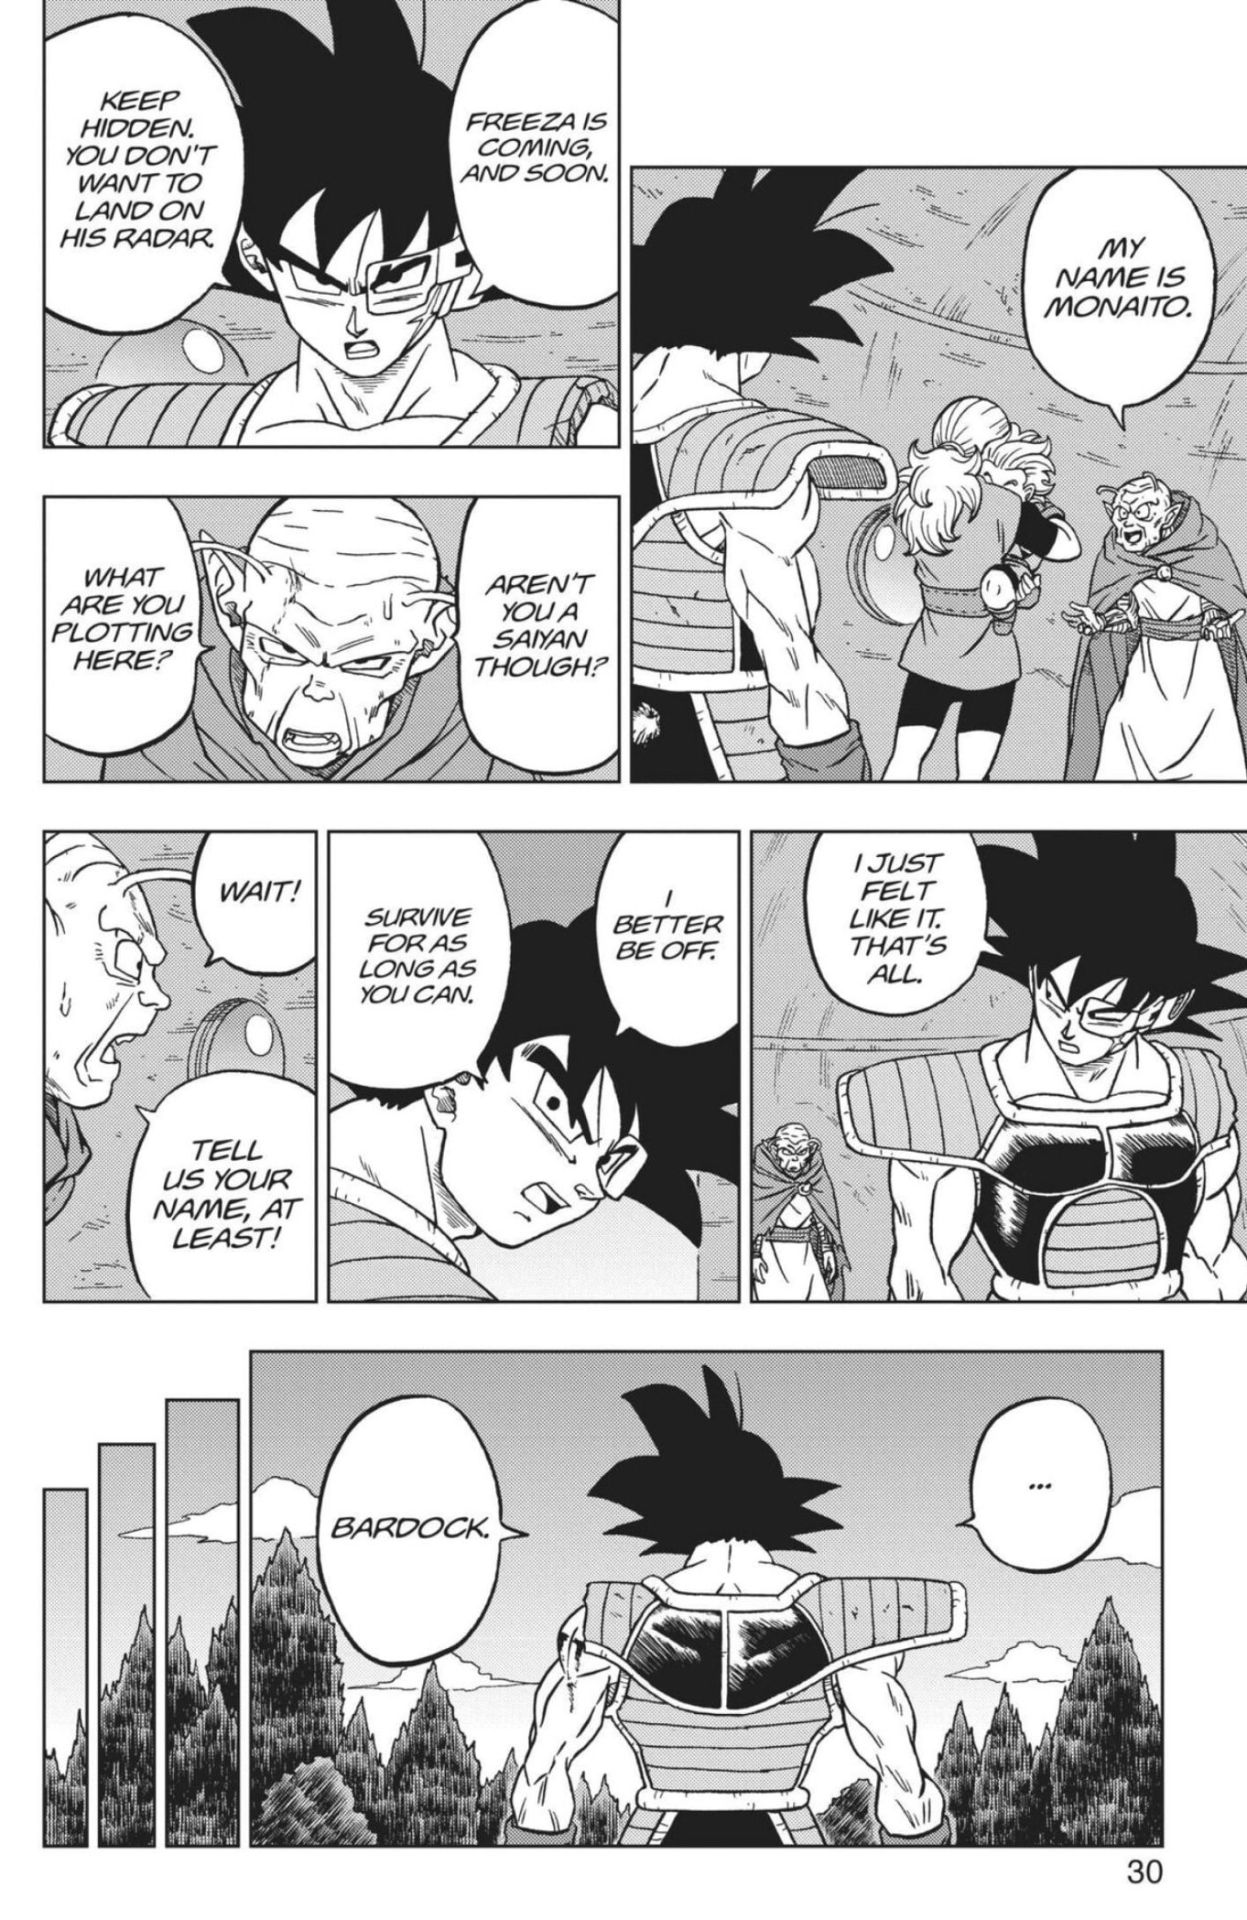 The Dragon Ball Super Manga's New SUPER HERO Arc Is Starting! Let's Take a  Look Back at the Previous Arc, Granolah the Survivor!! ]